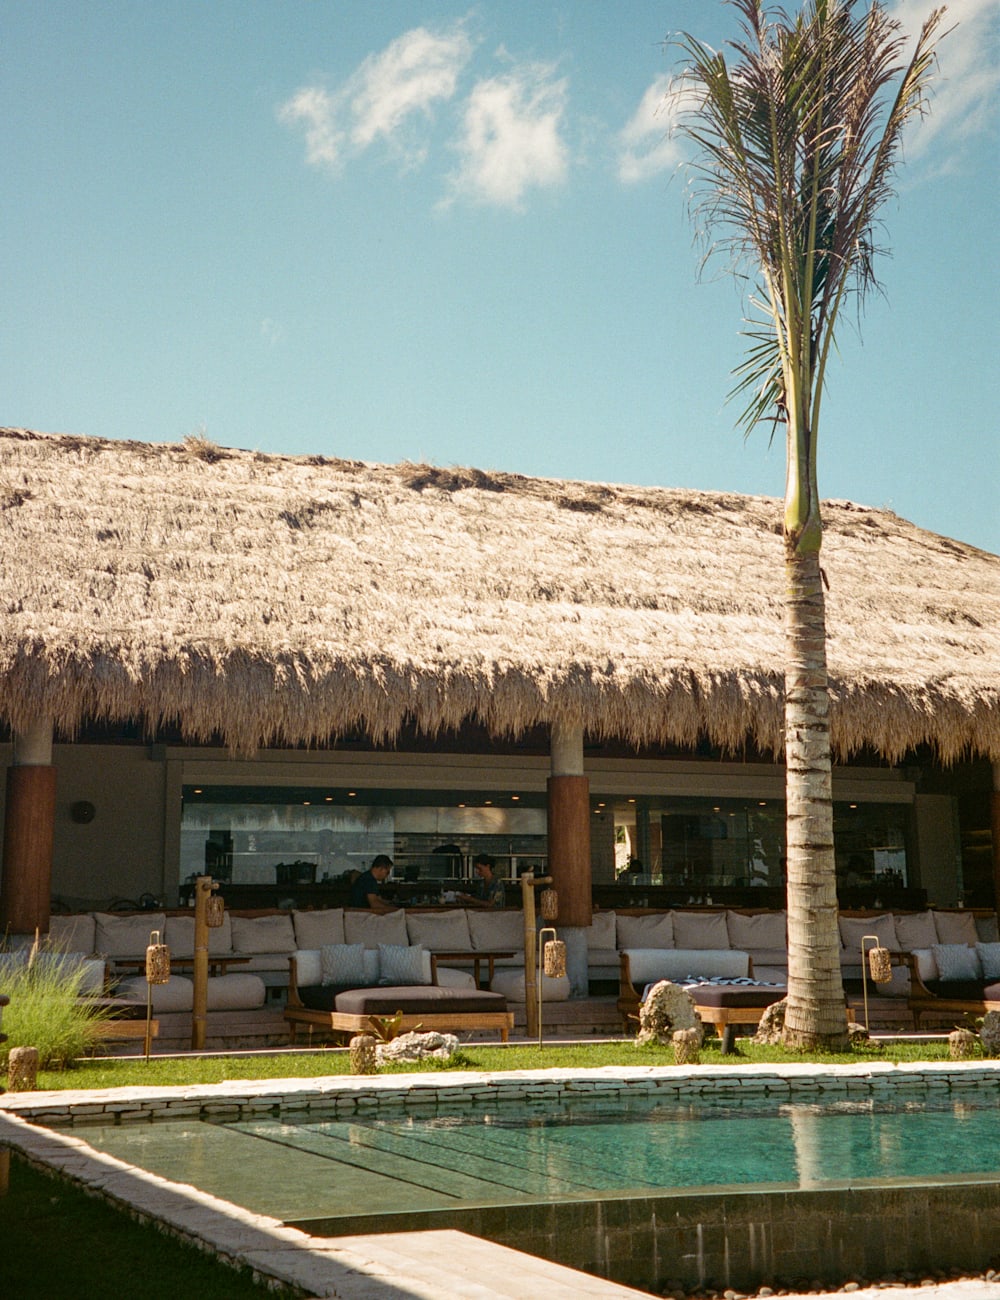 Swimming pool at Cap Karoso, Sumba, by Hannah Dace for Mr & Mrs Smith